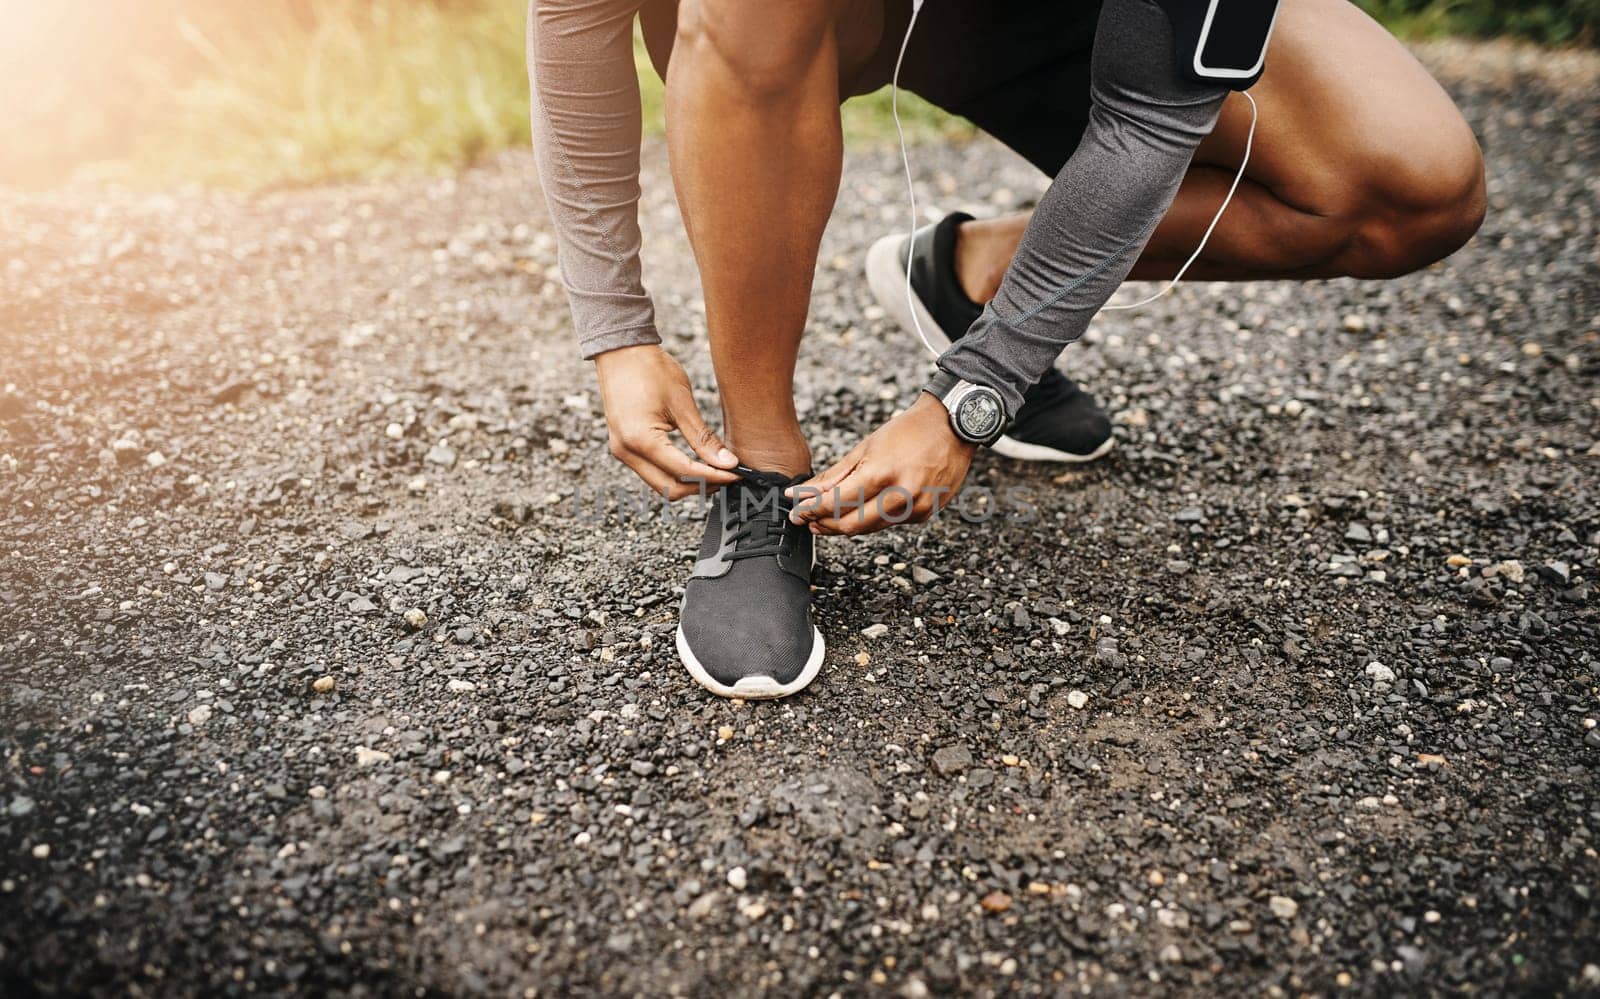 Person, hands and shoelace with exercise or running for fitness, health and wellbeing in outdoor. Road, sneakers and committed on workout or jog in morning for training, wellness and self care.